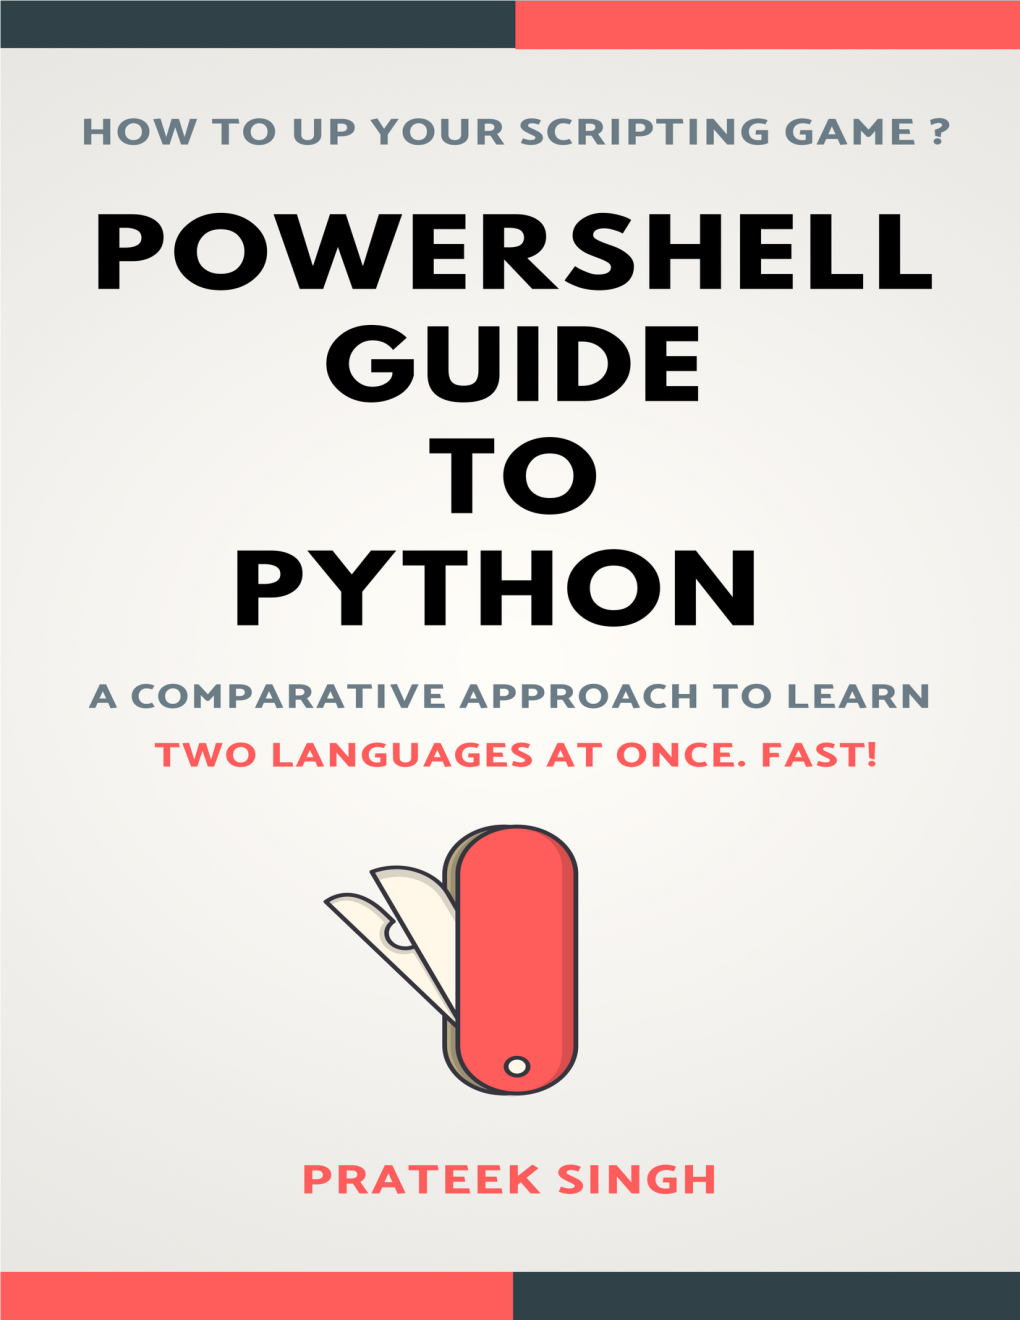 Powershell Guide to Python a Comparative Approach to Learn Two Scripting Languages at Once